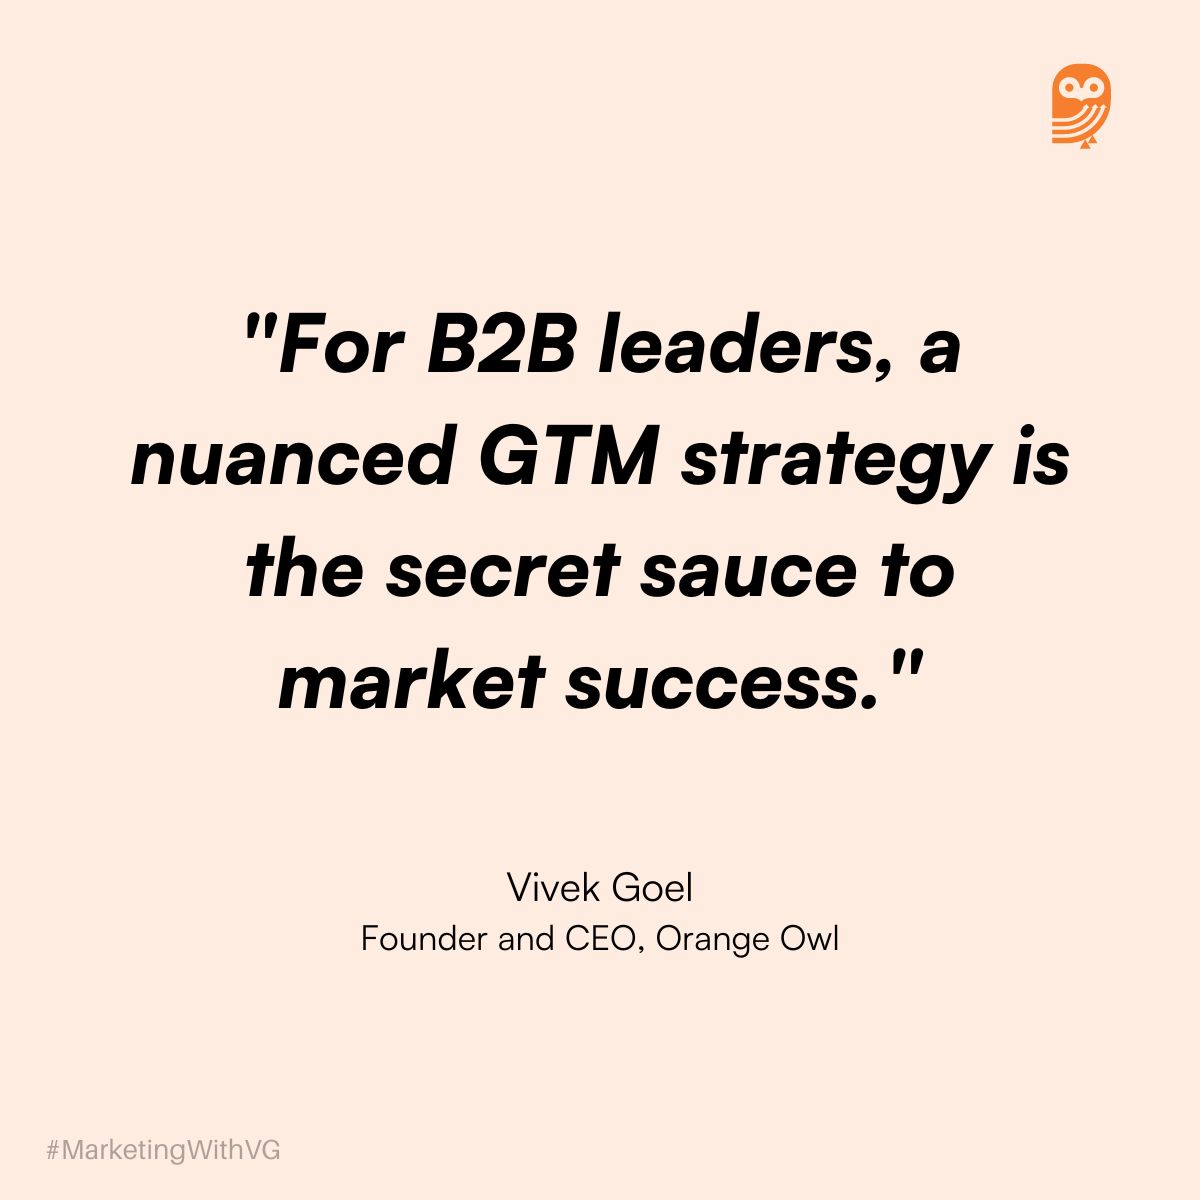 Quotes by vivek on b2b leaders